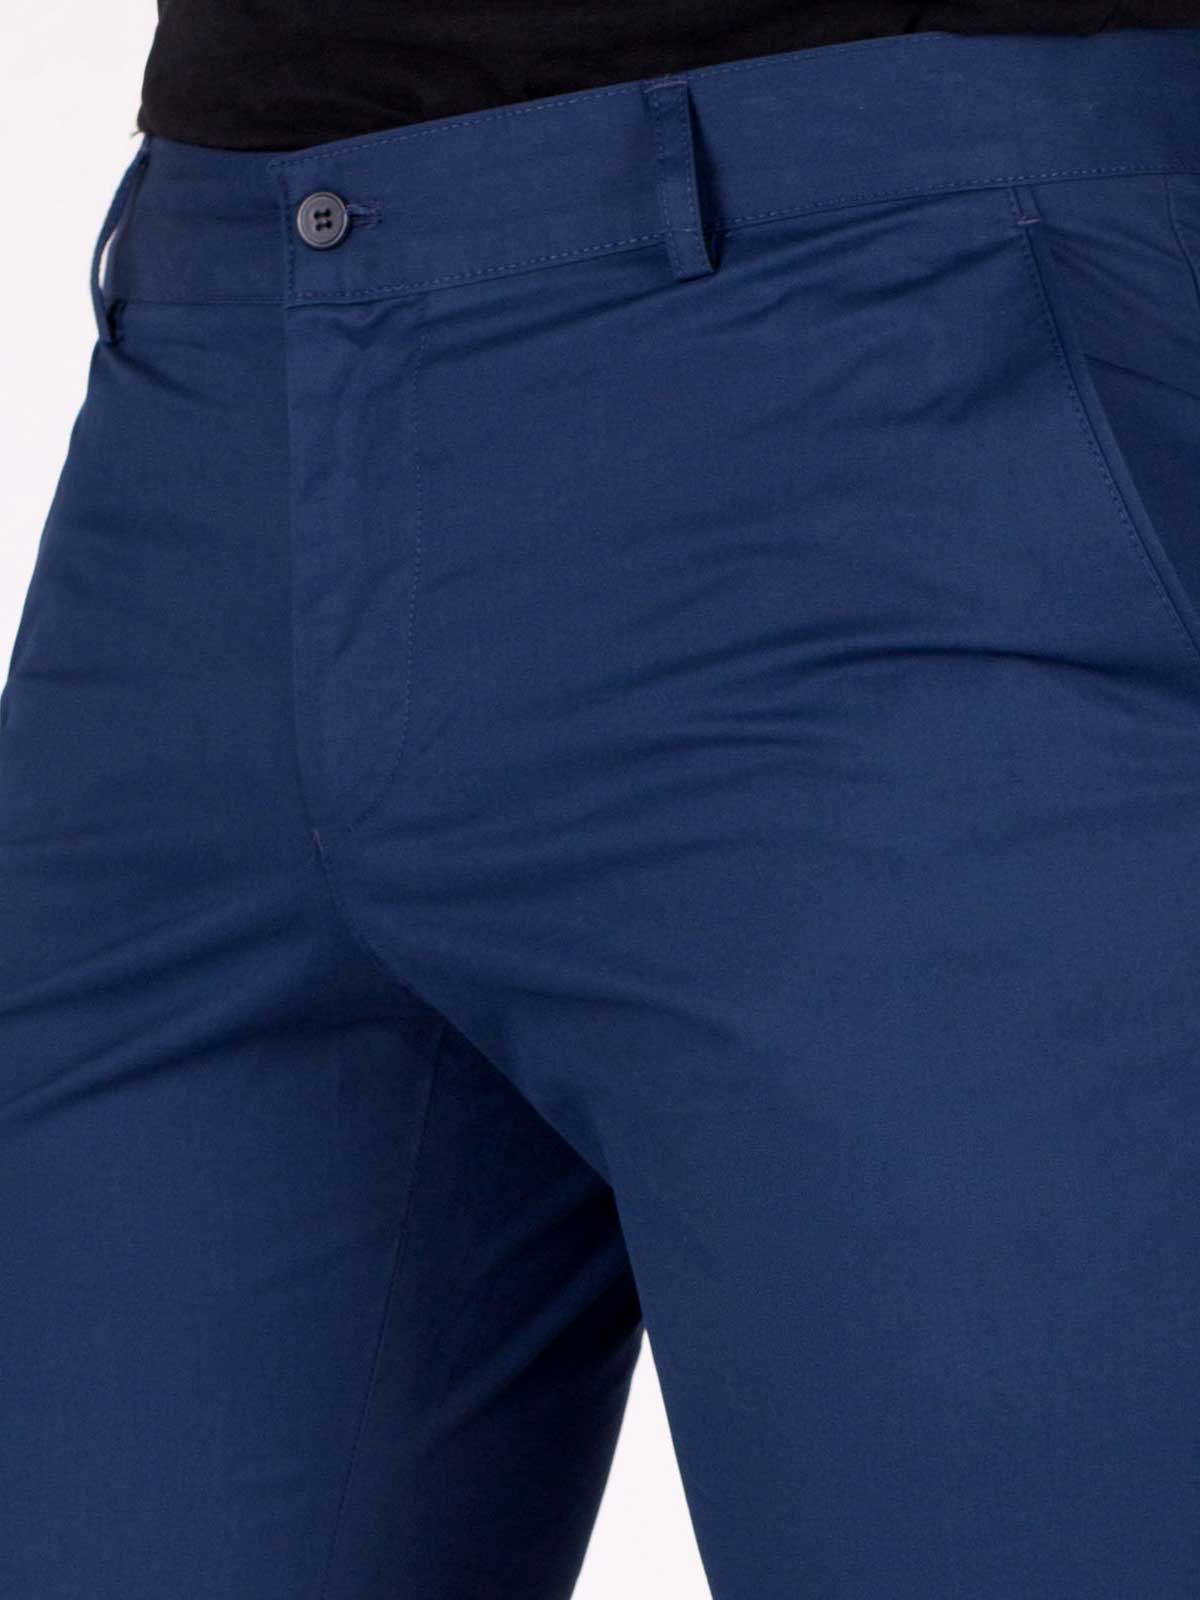 Fitted trousers in blue - 63188 € 16.31 img3